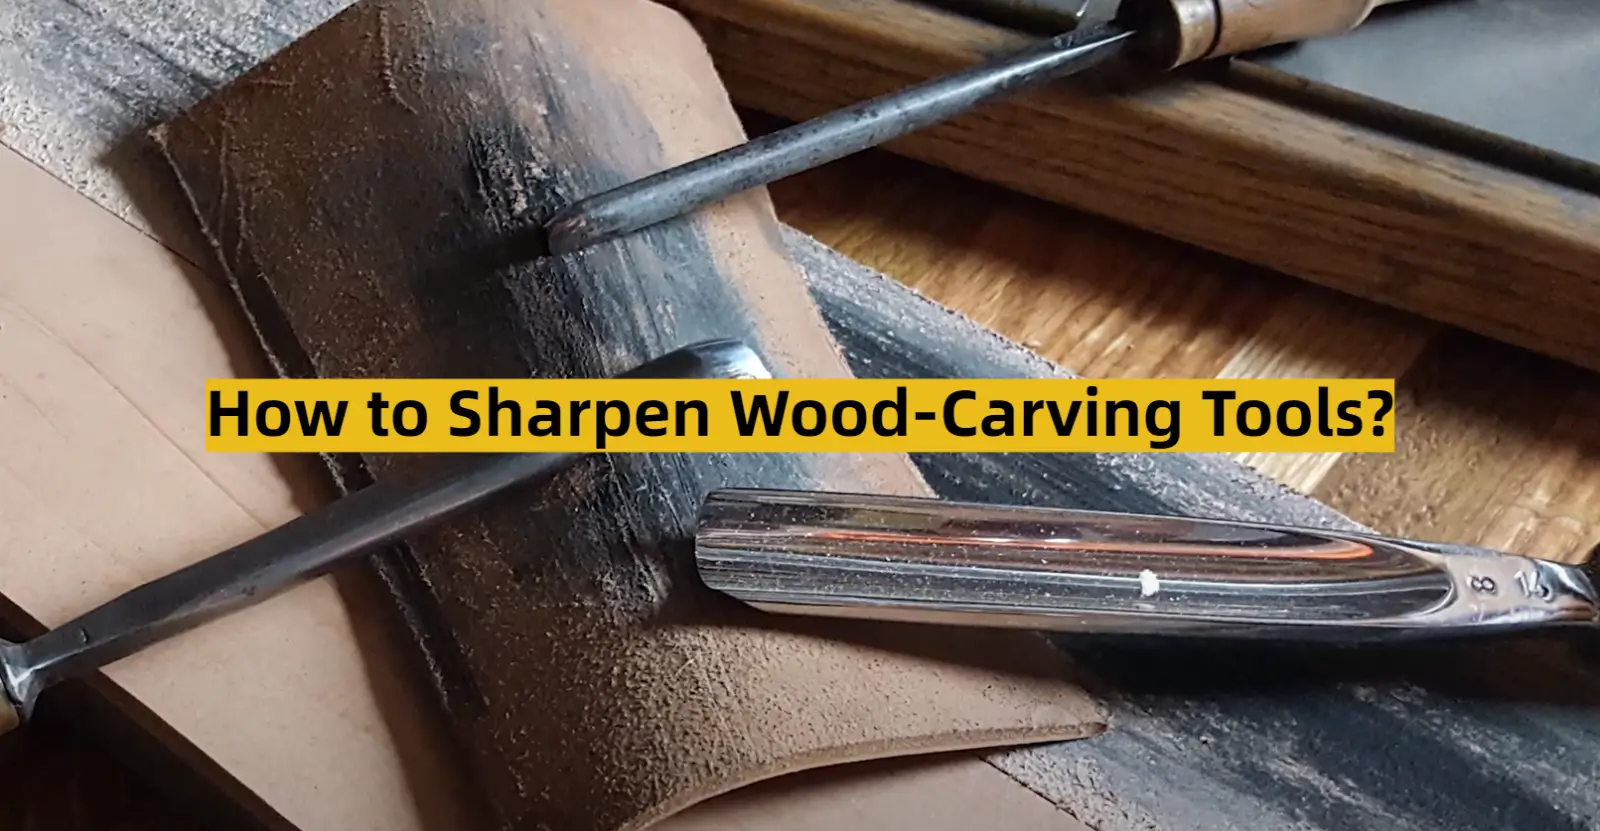 How to Sharpen Wood-Carving Tools?